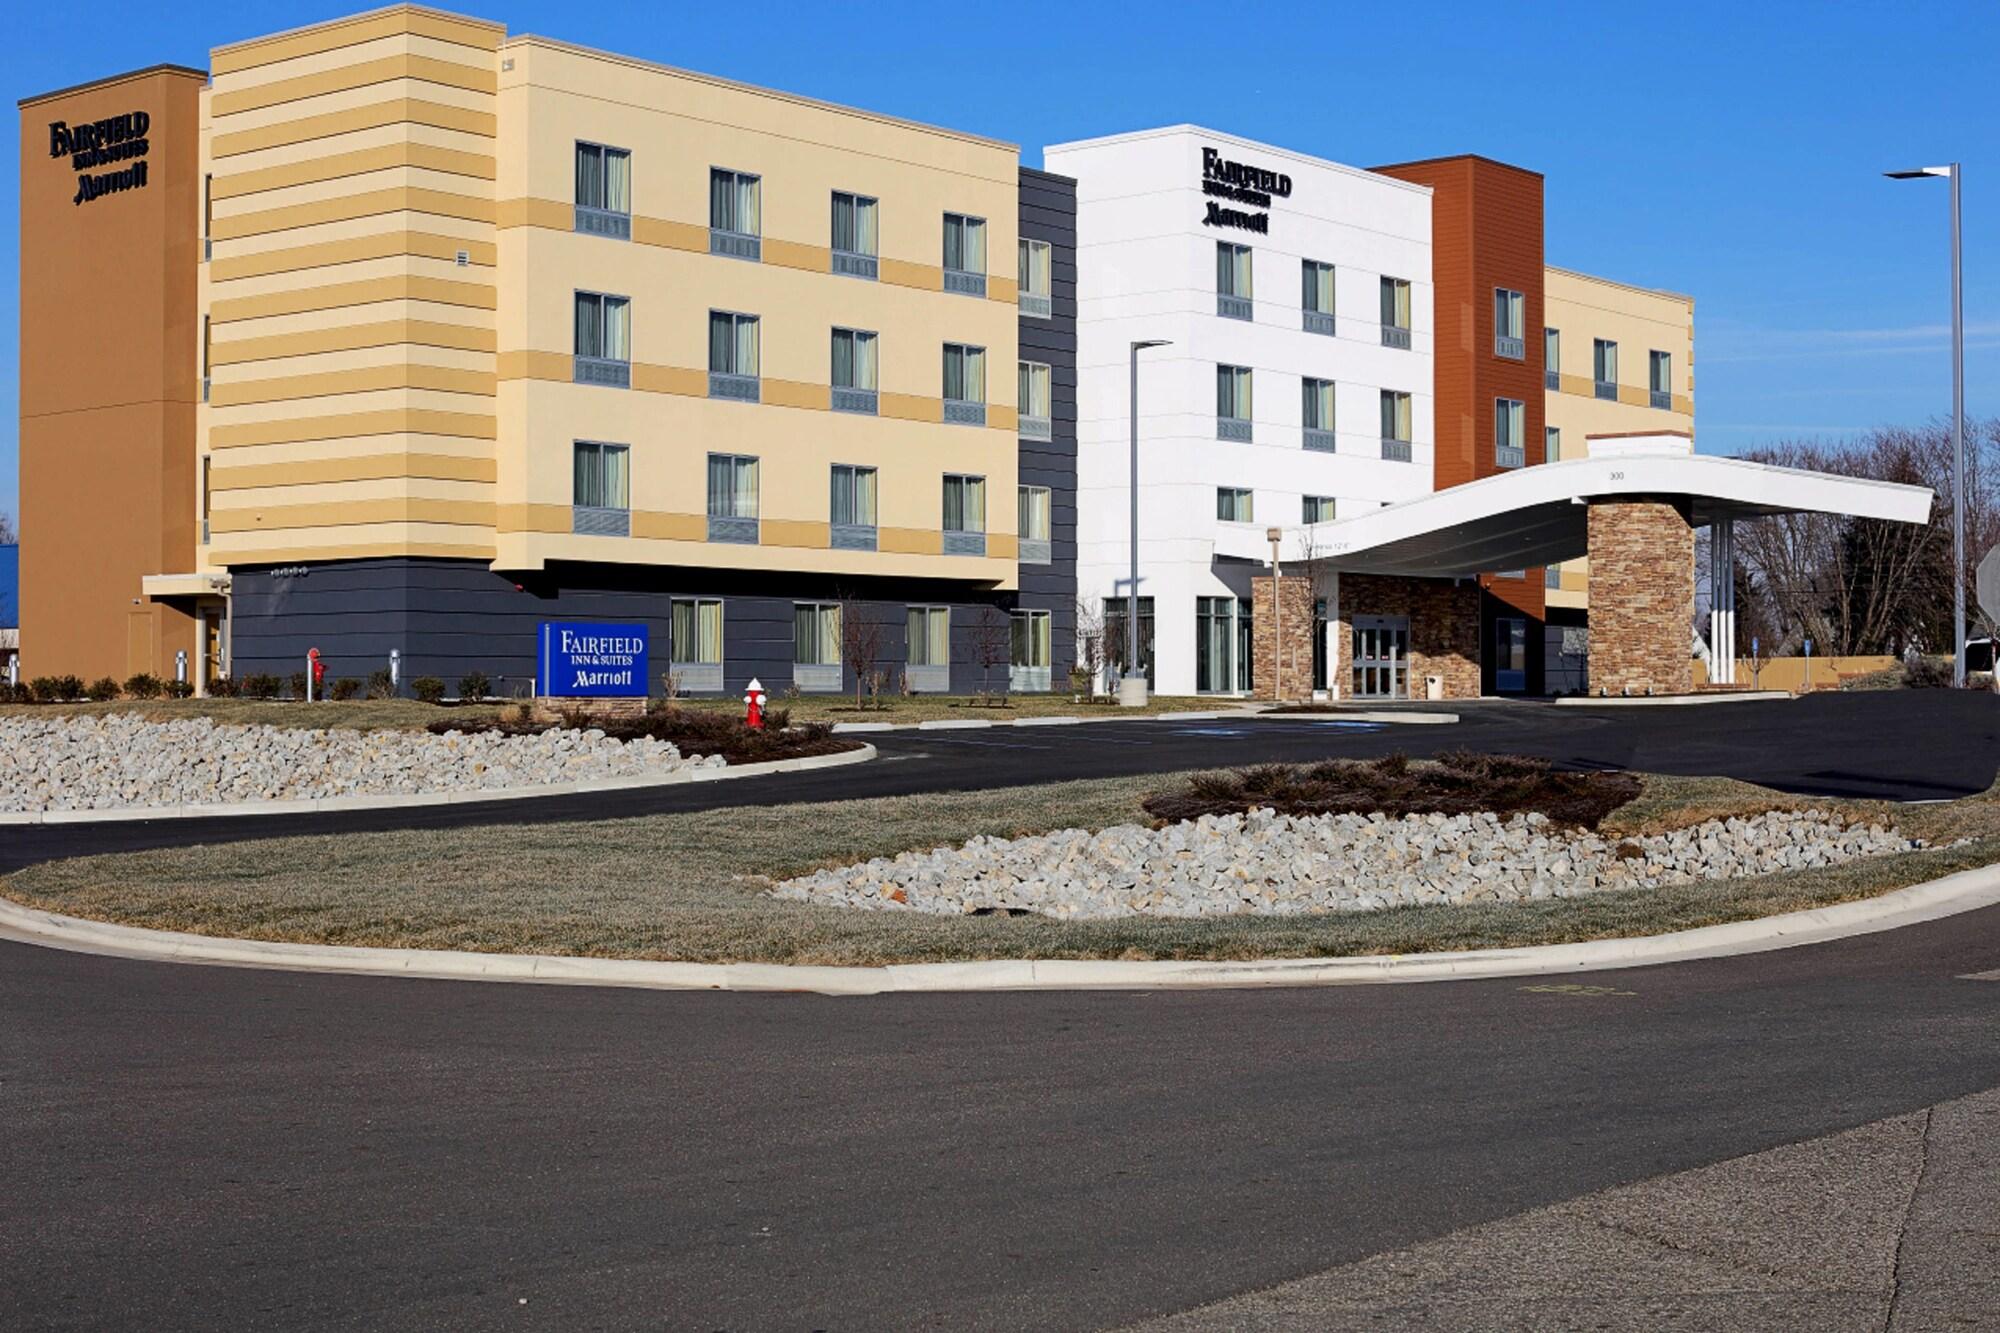 Fairfield Inn & Suites by Marriott Chillicothe, OH image